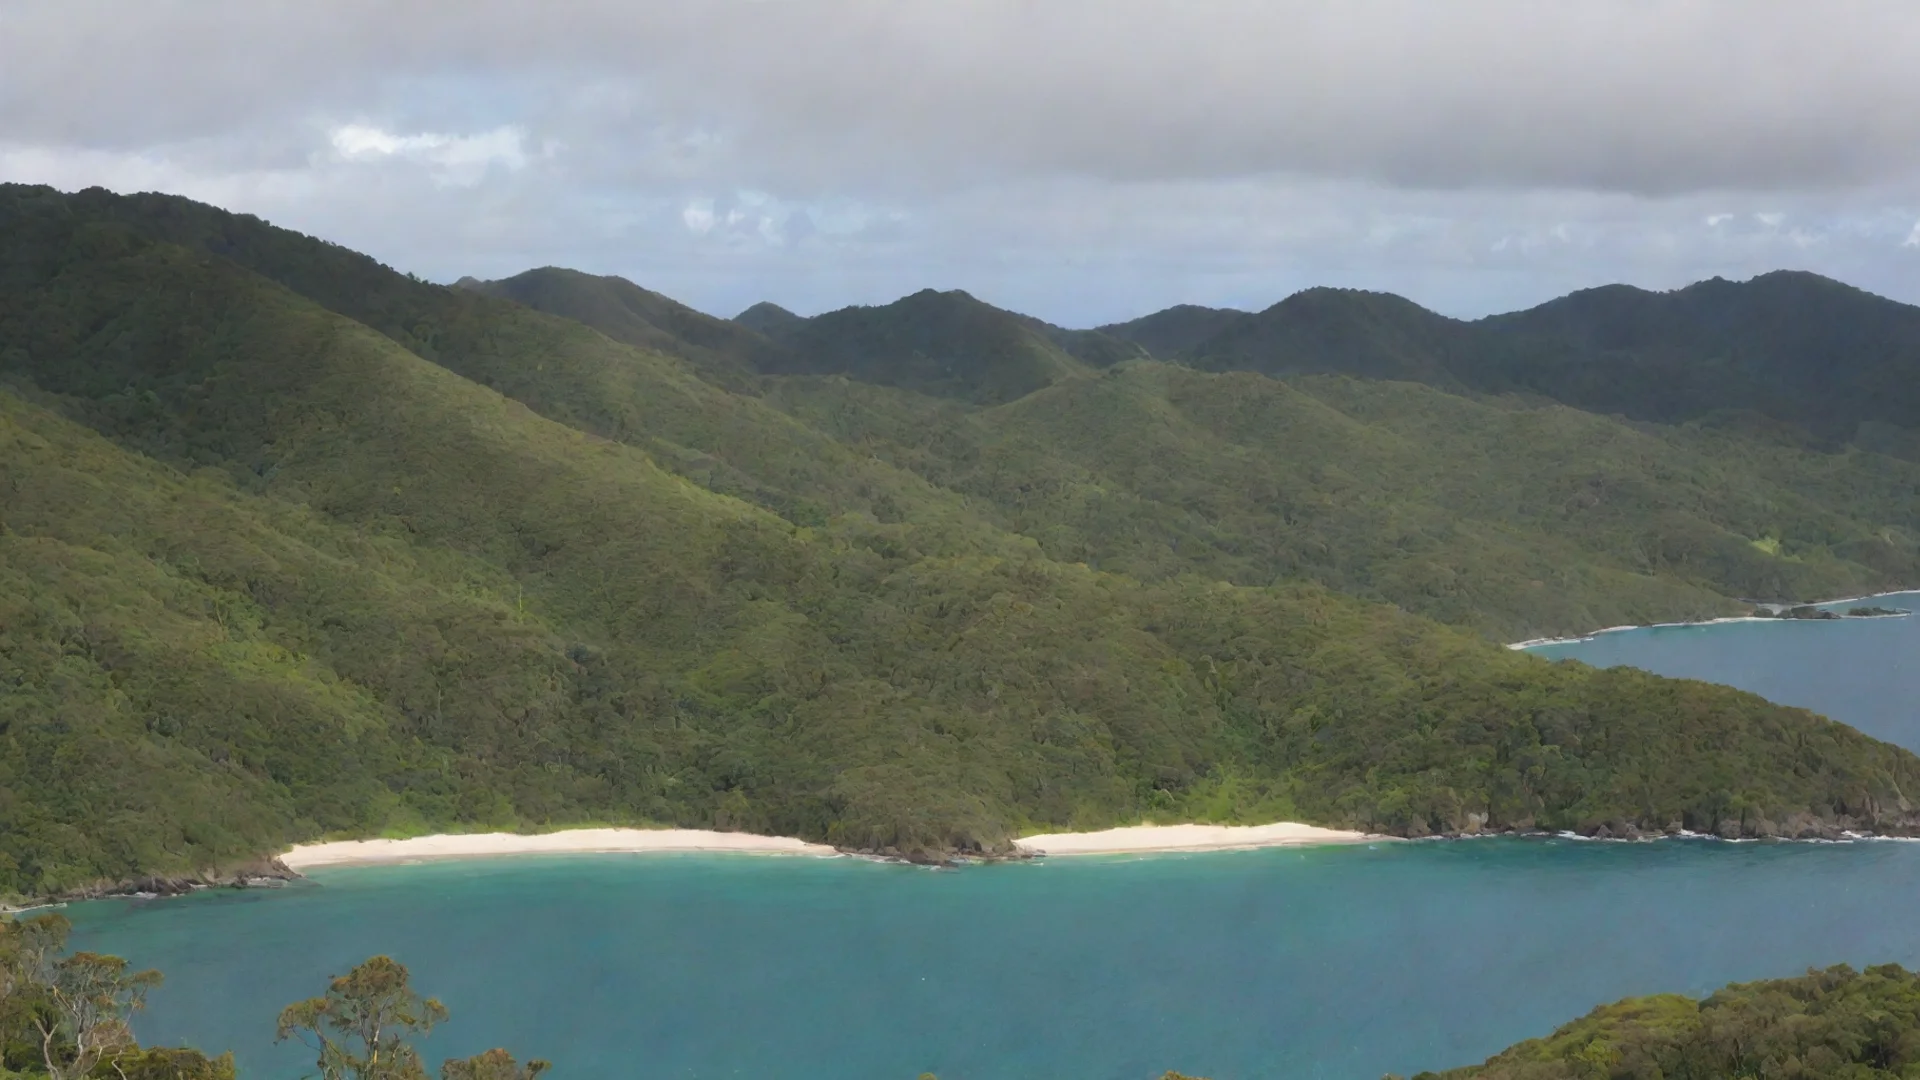 amazing forests rolling hills on shore pitureque bay of islands awesome portrait 2 wide